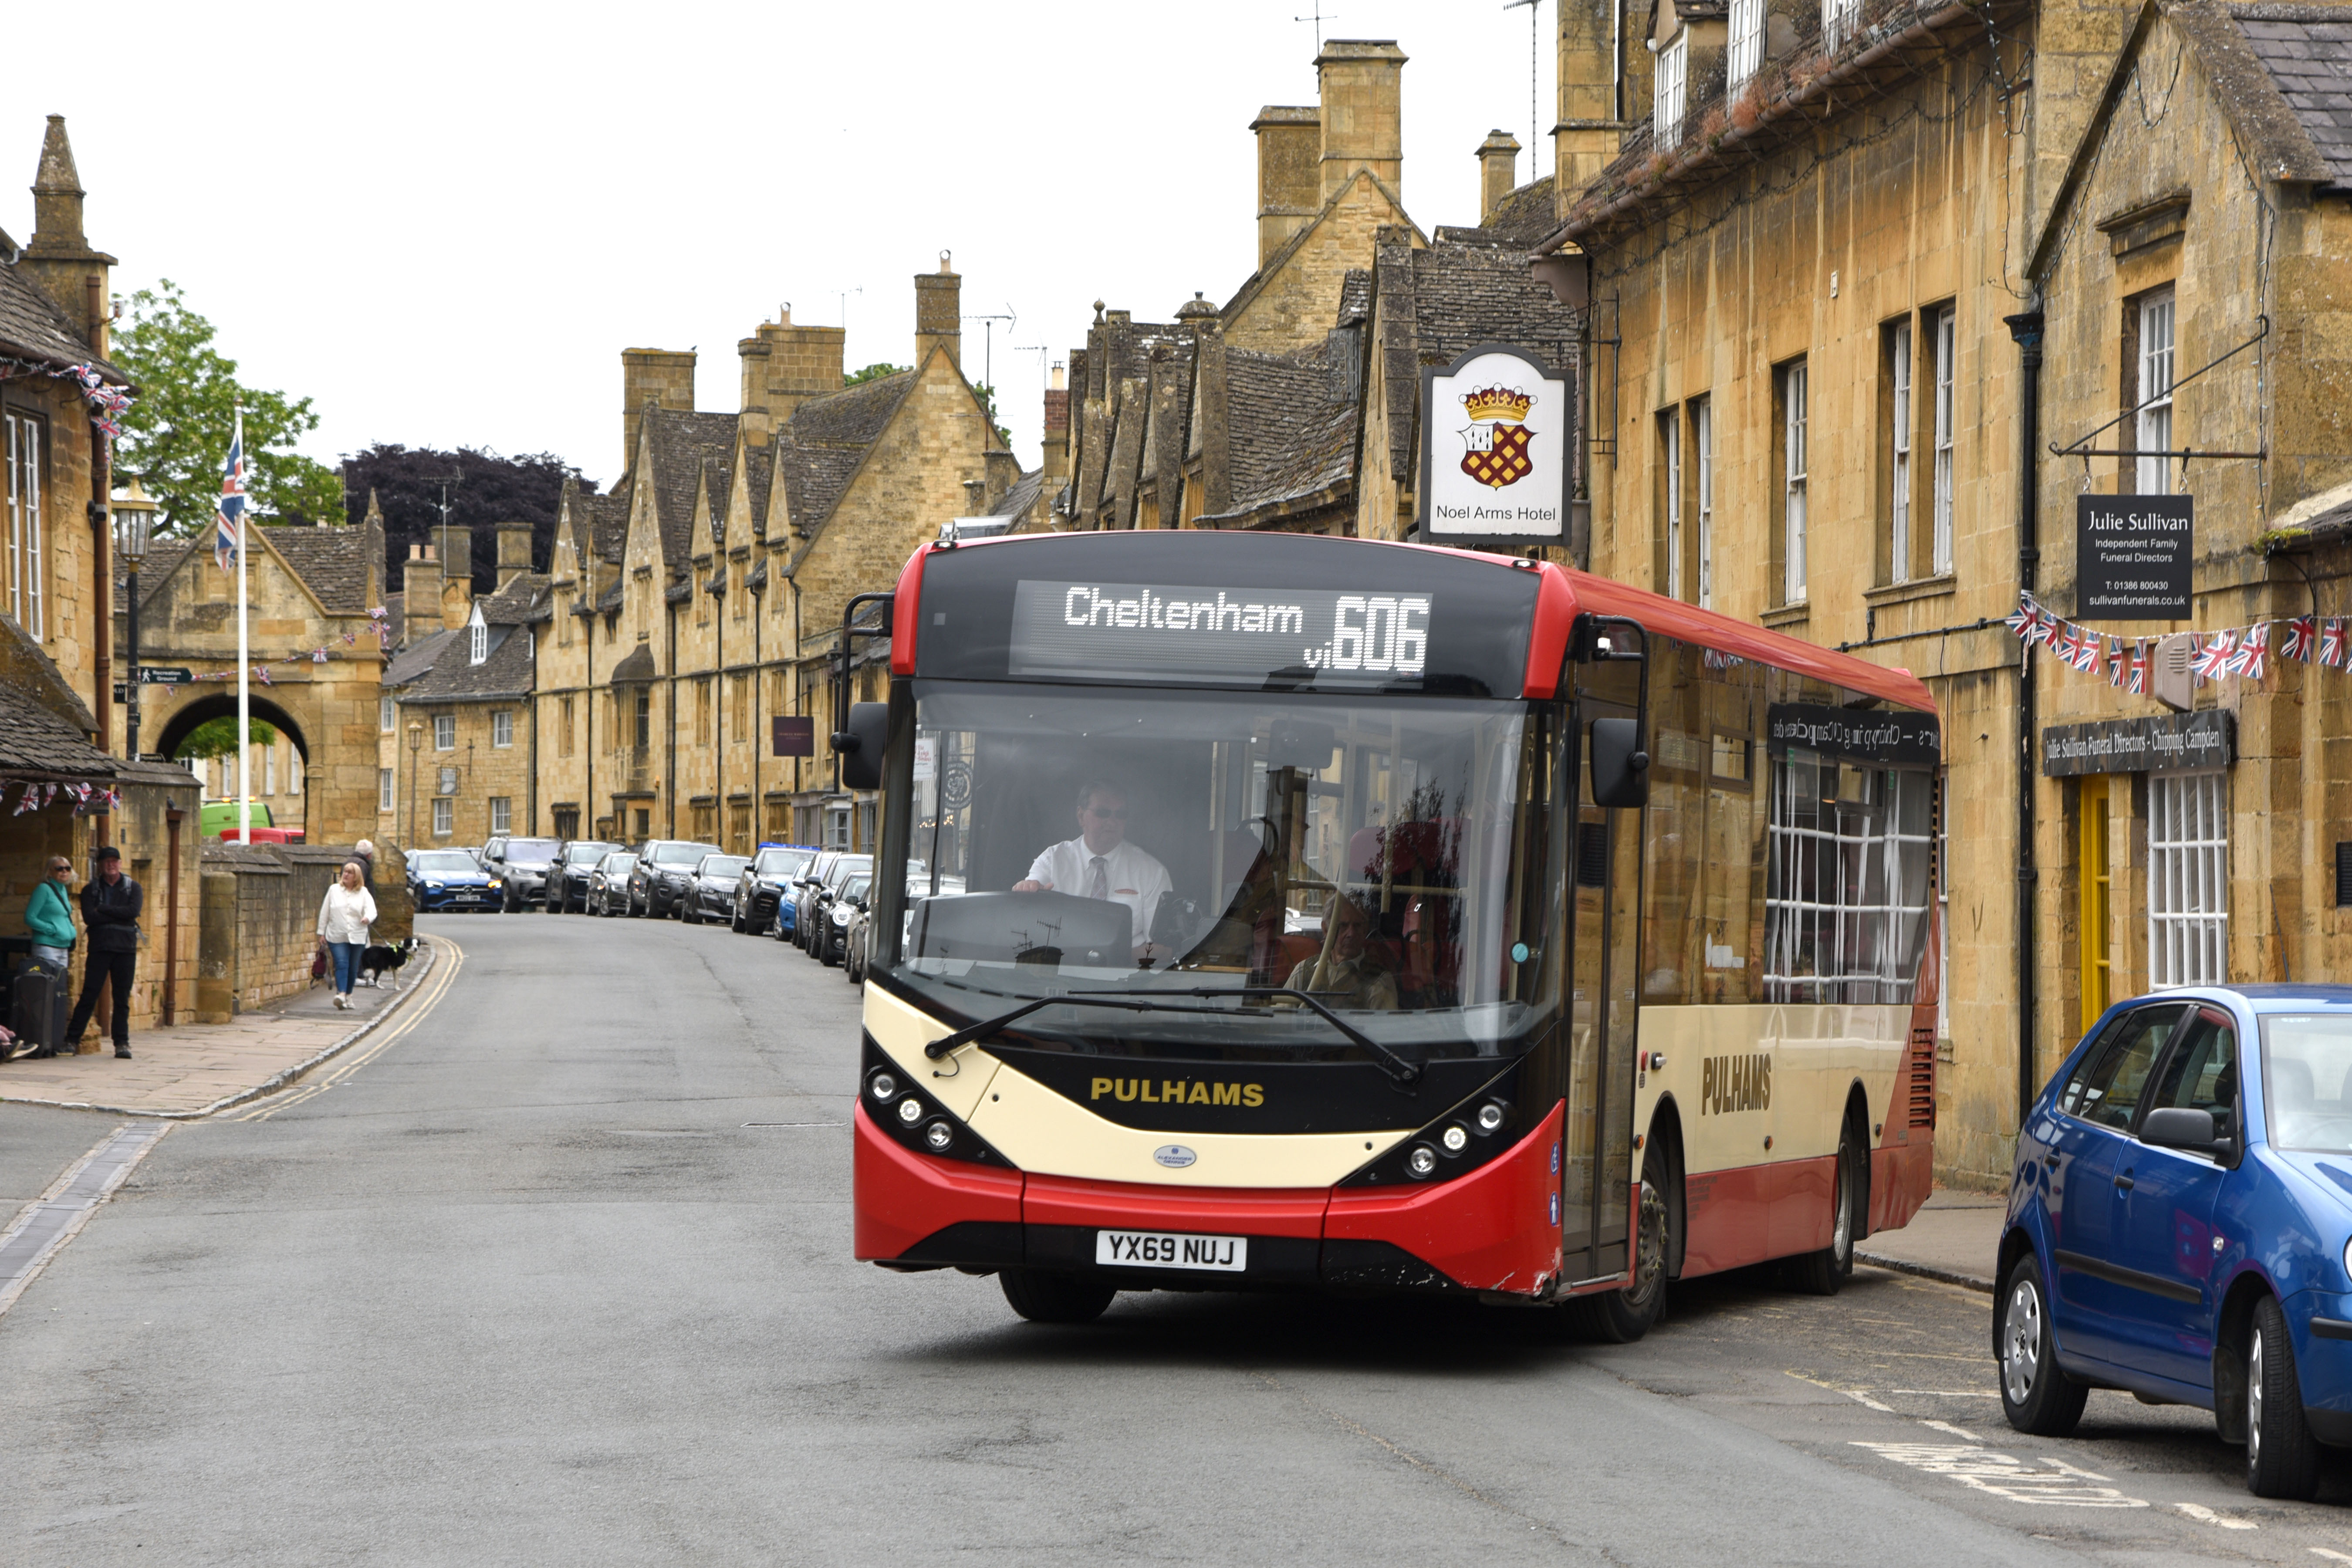 Pulham's bus operating in the Cotswolds